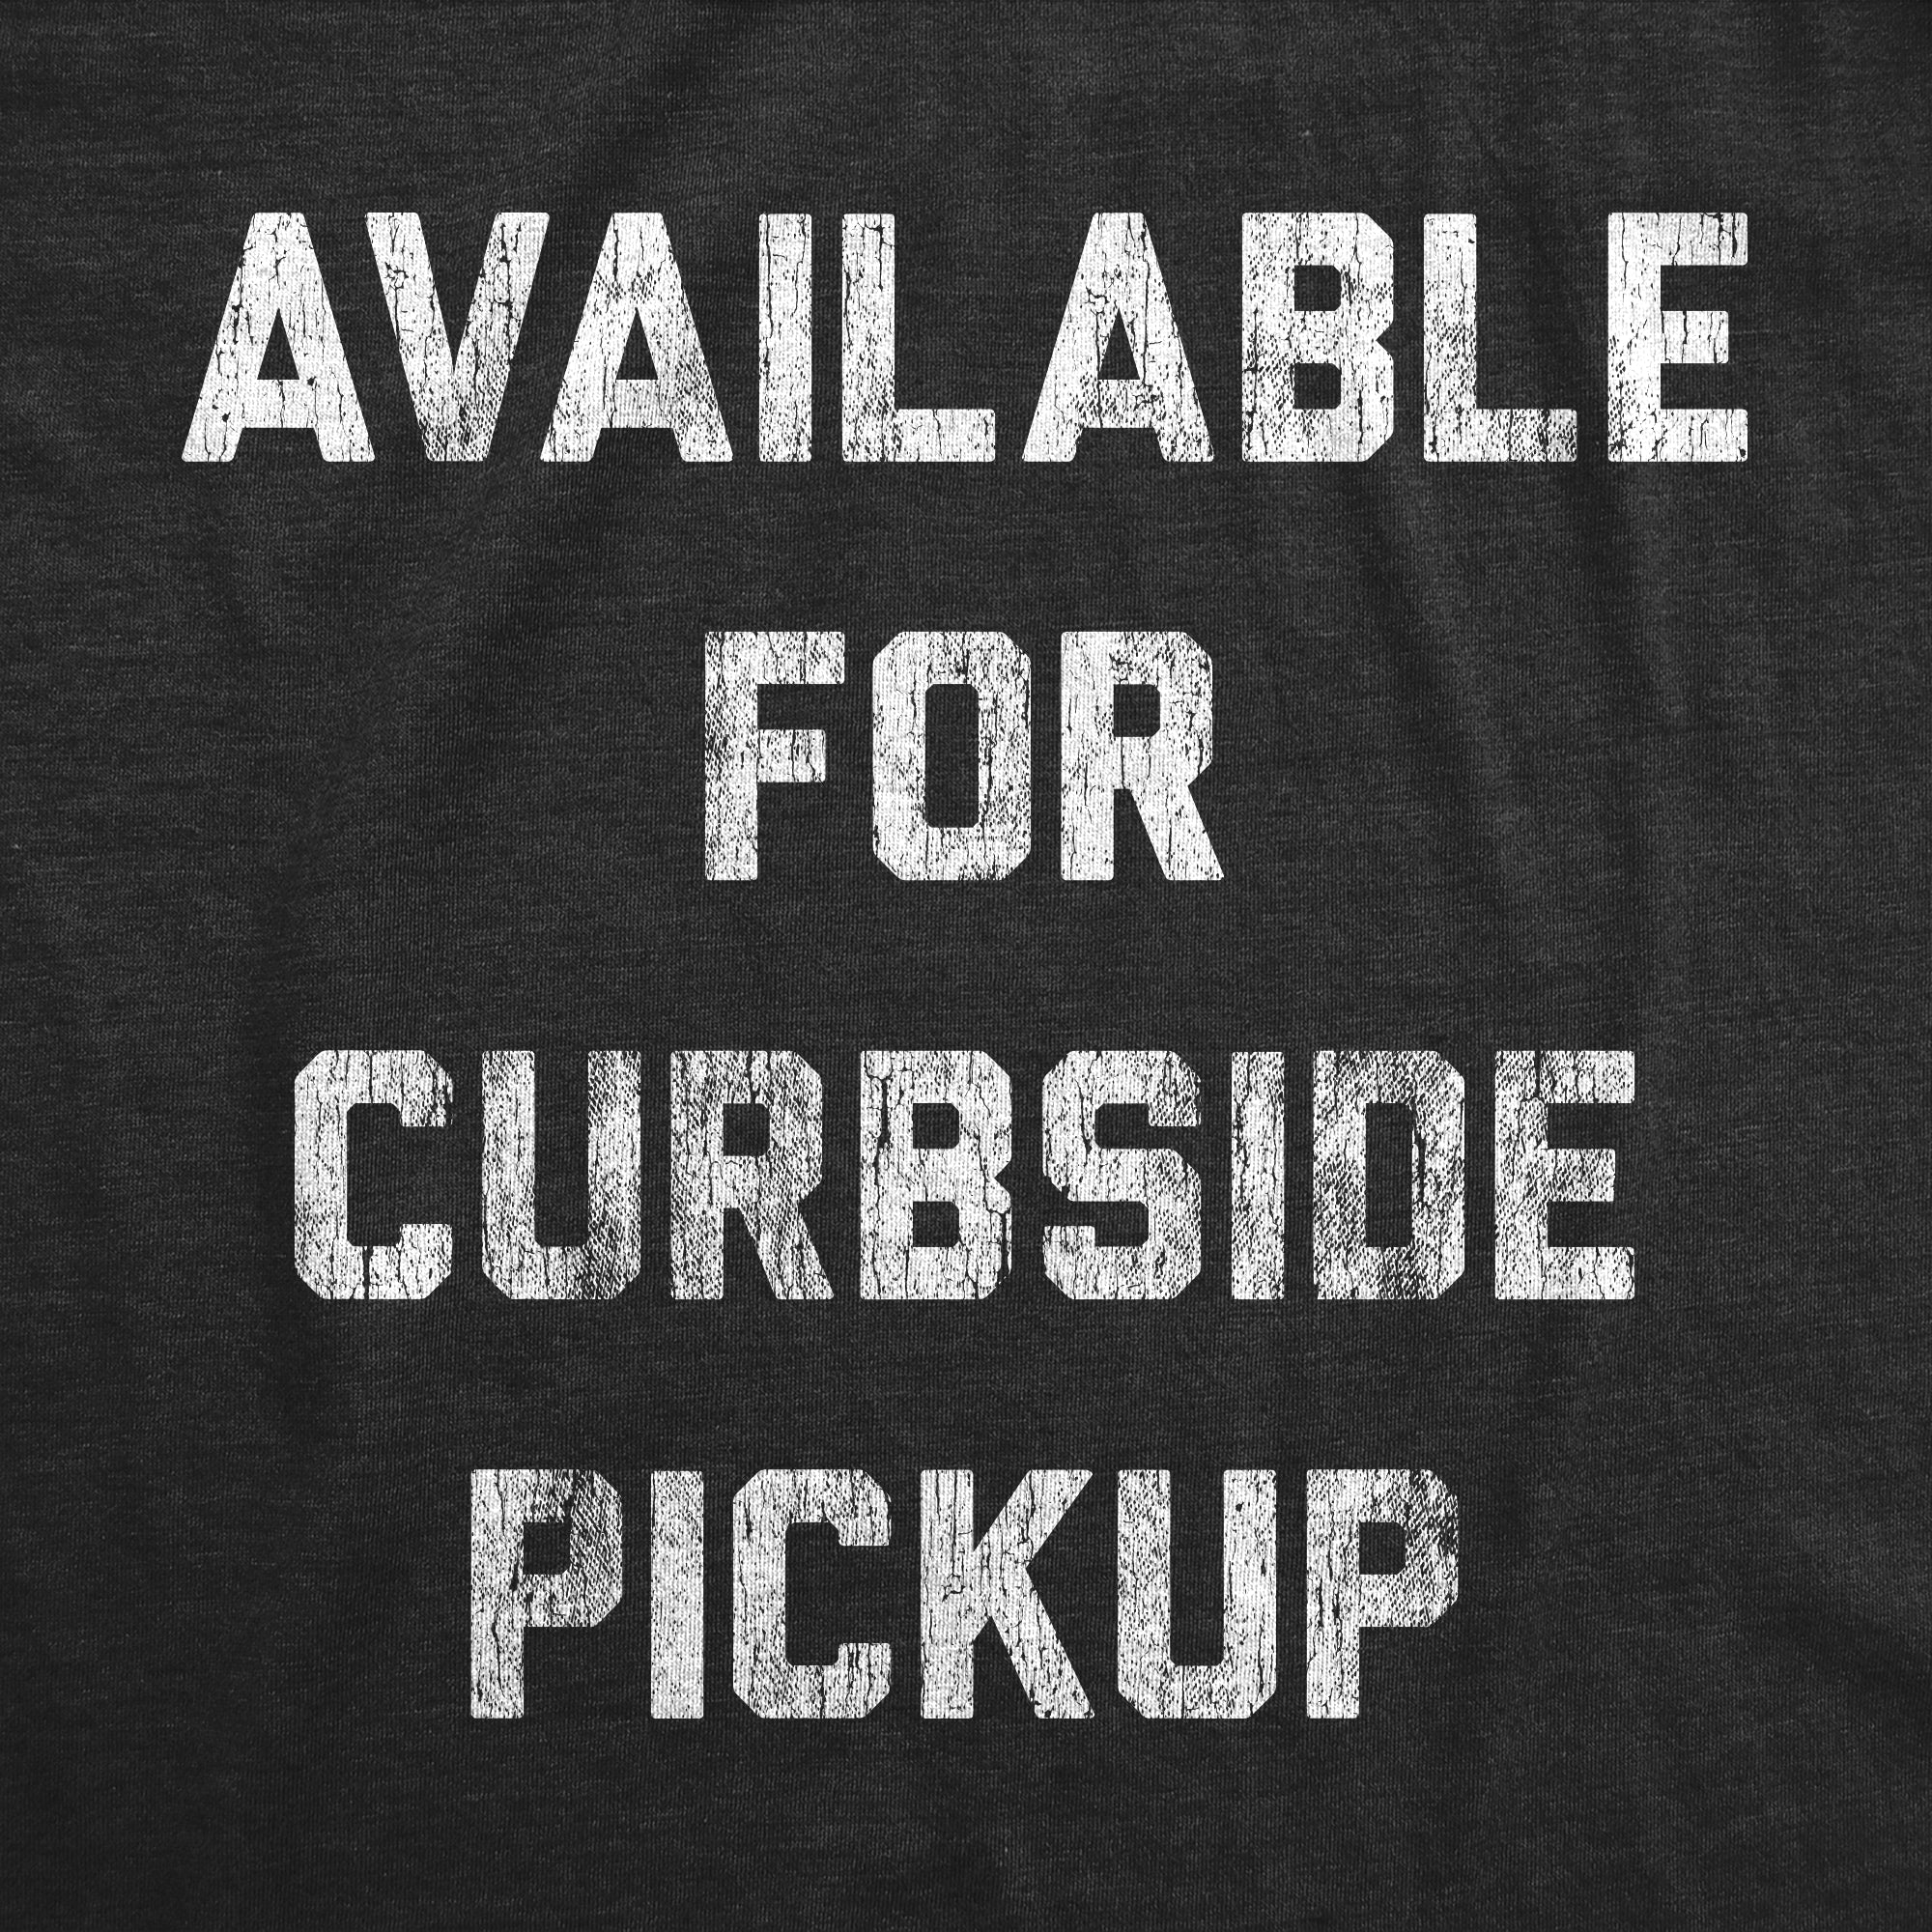 Funny Heather Black Available For Curbside Pickup Mens T Shirt Nerdy Valentine's Day Introvert Tee